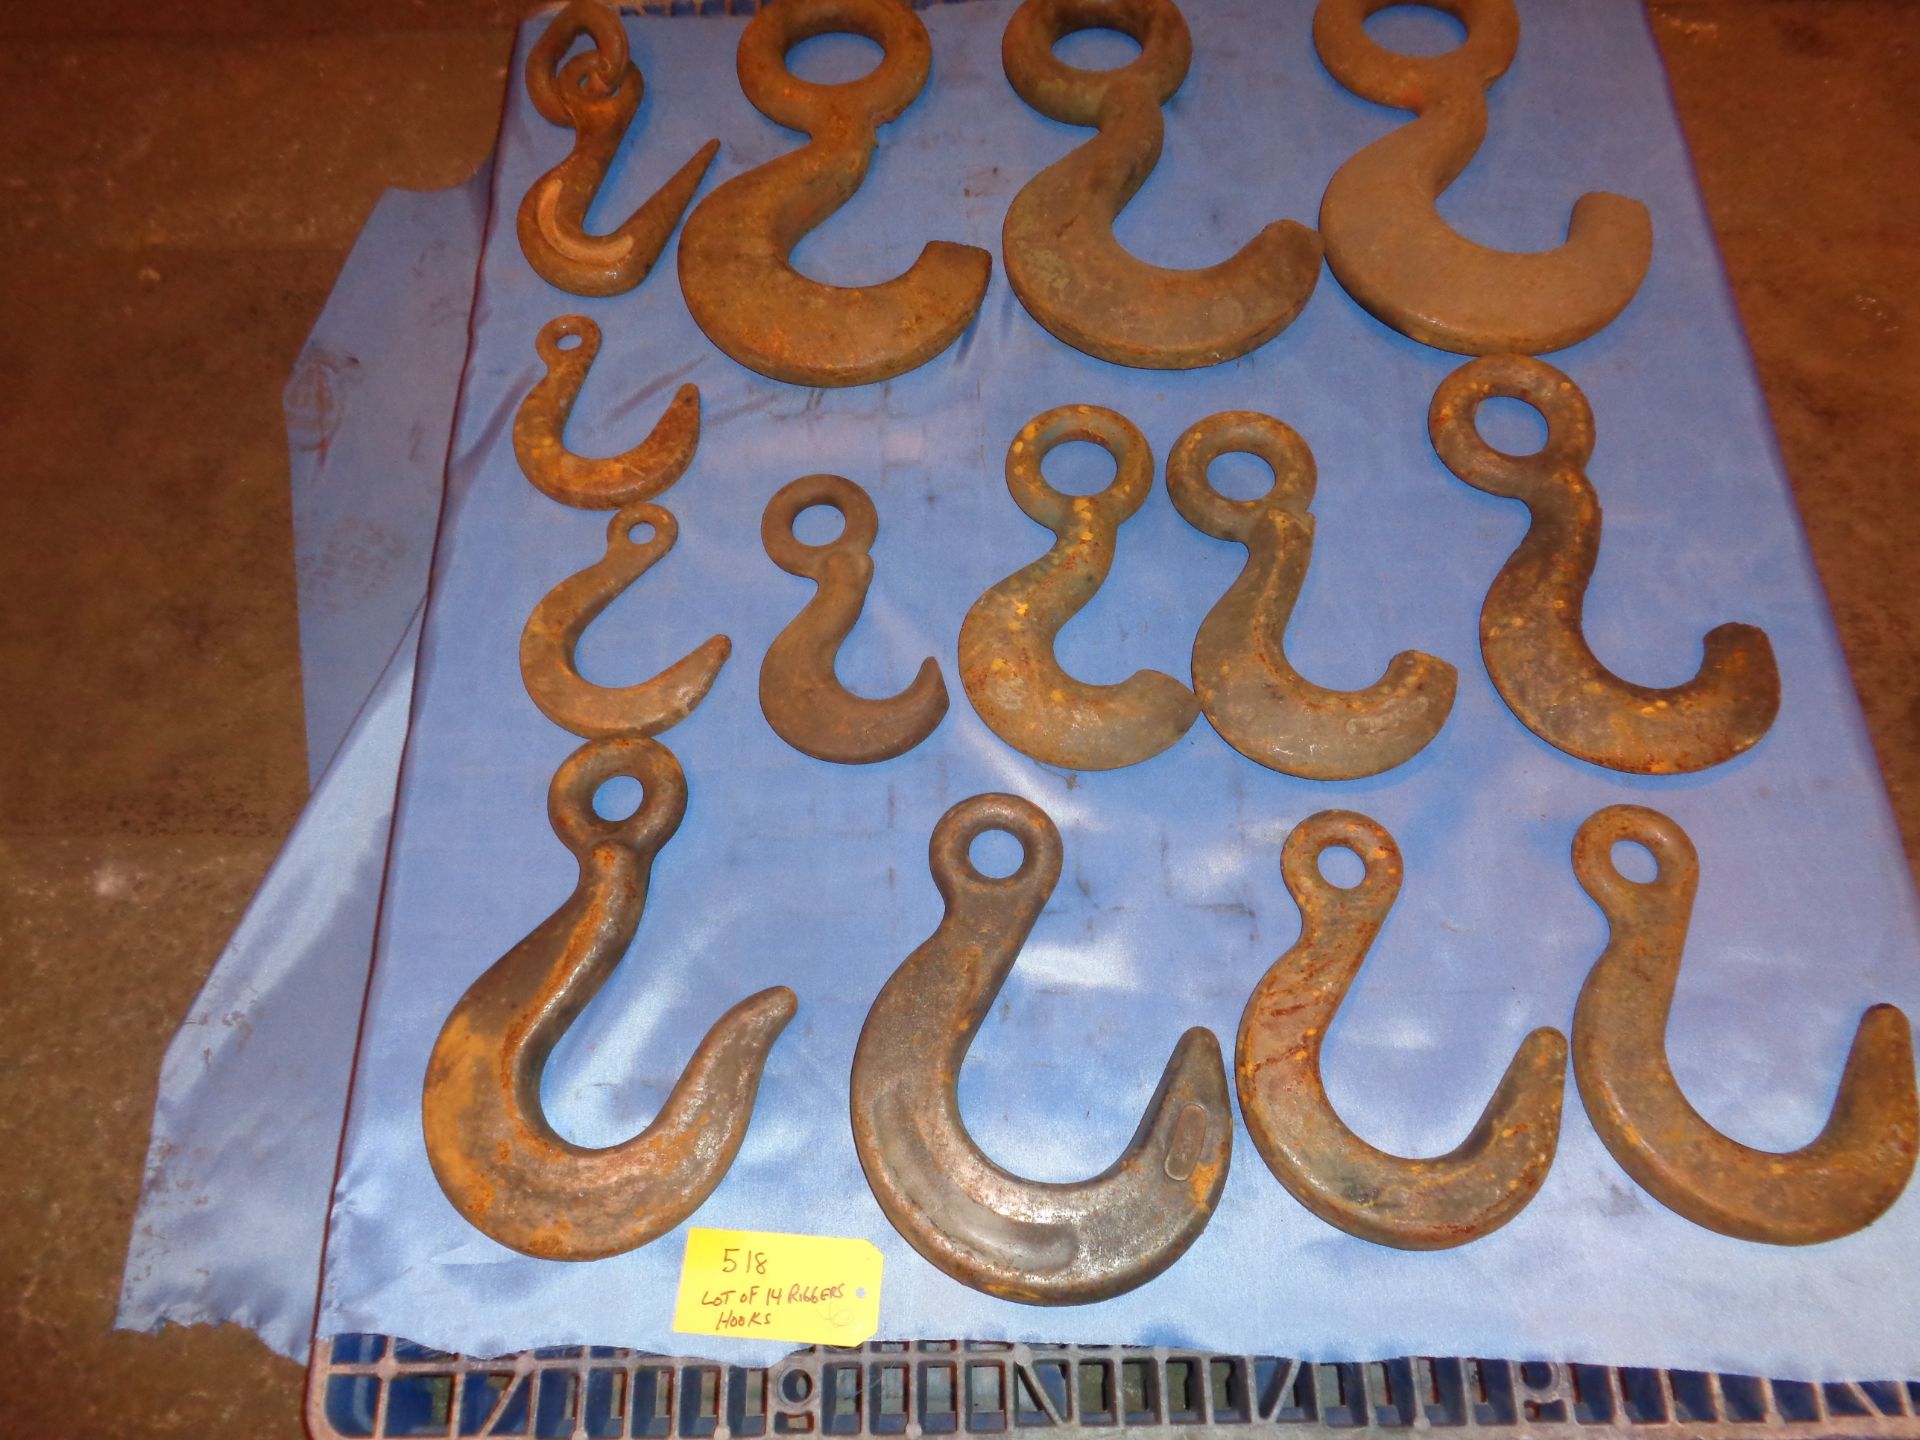 Lot of 14 Riggers Hooks (#518)